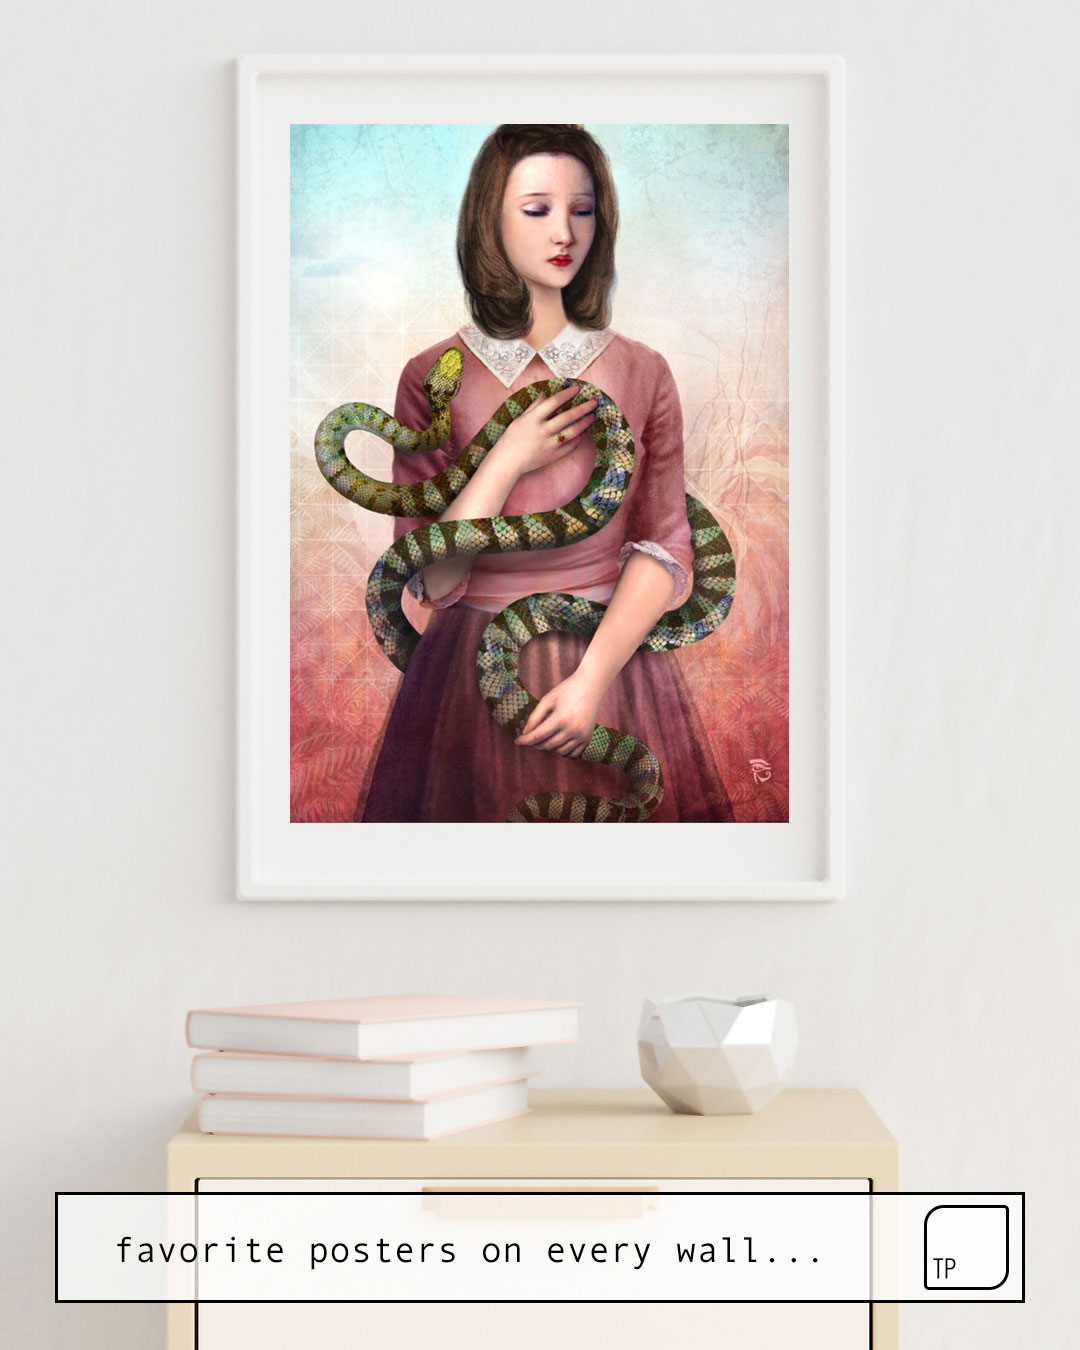 The photo shows an example of furnishing with the motif MIRACLE by Christian Schloe as mural